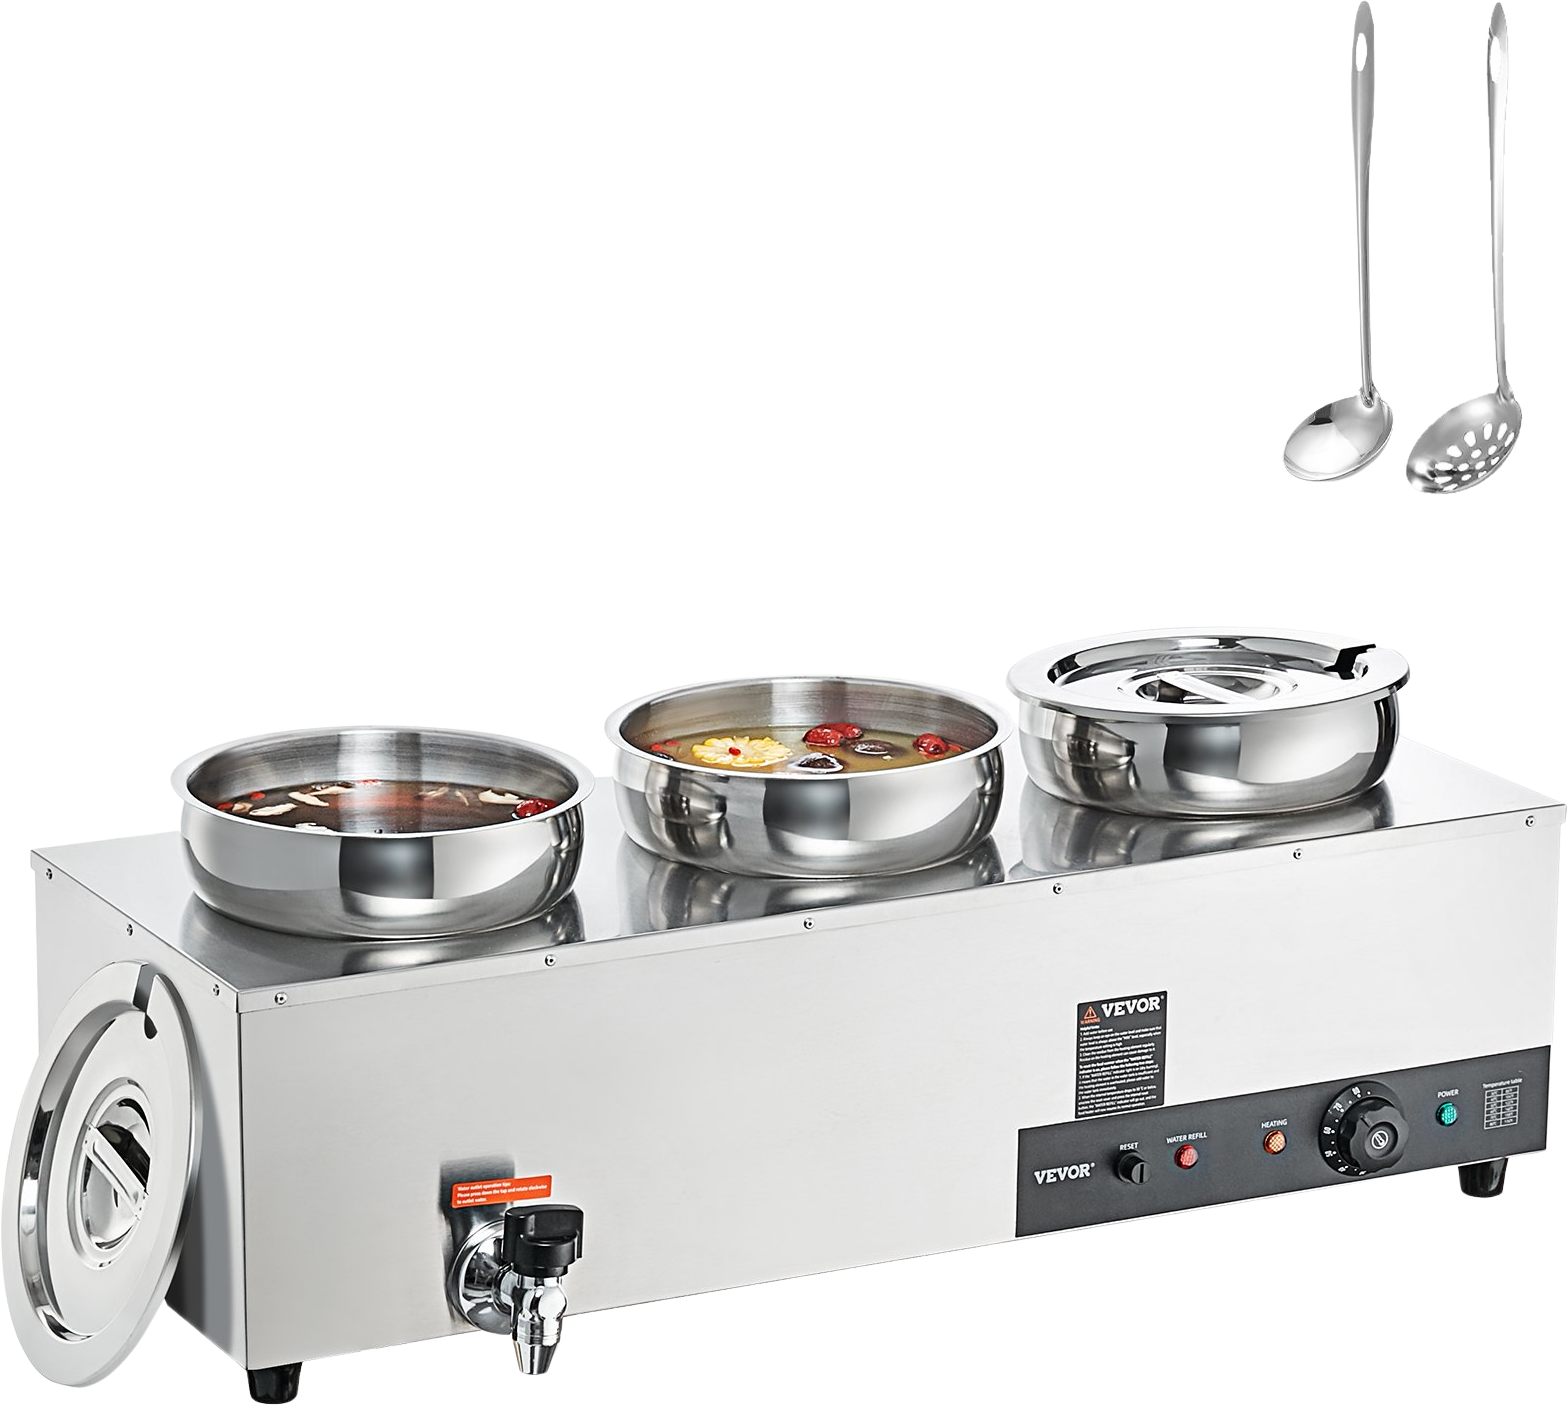 Vevor Electric Soup Warmer 3 Pot 7.4 Qt. with Lids 1200W Commercial Bain Marie with Anti-Dry Burn Stainless Steel New